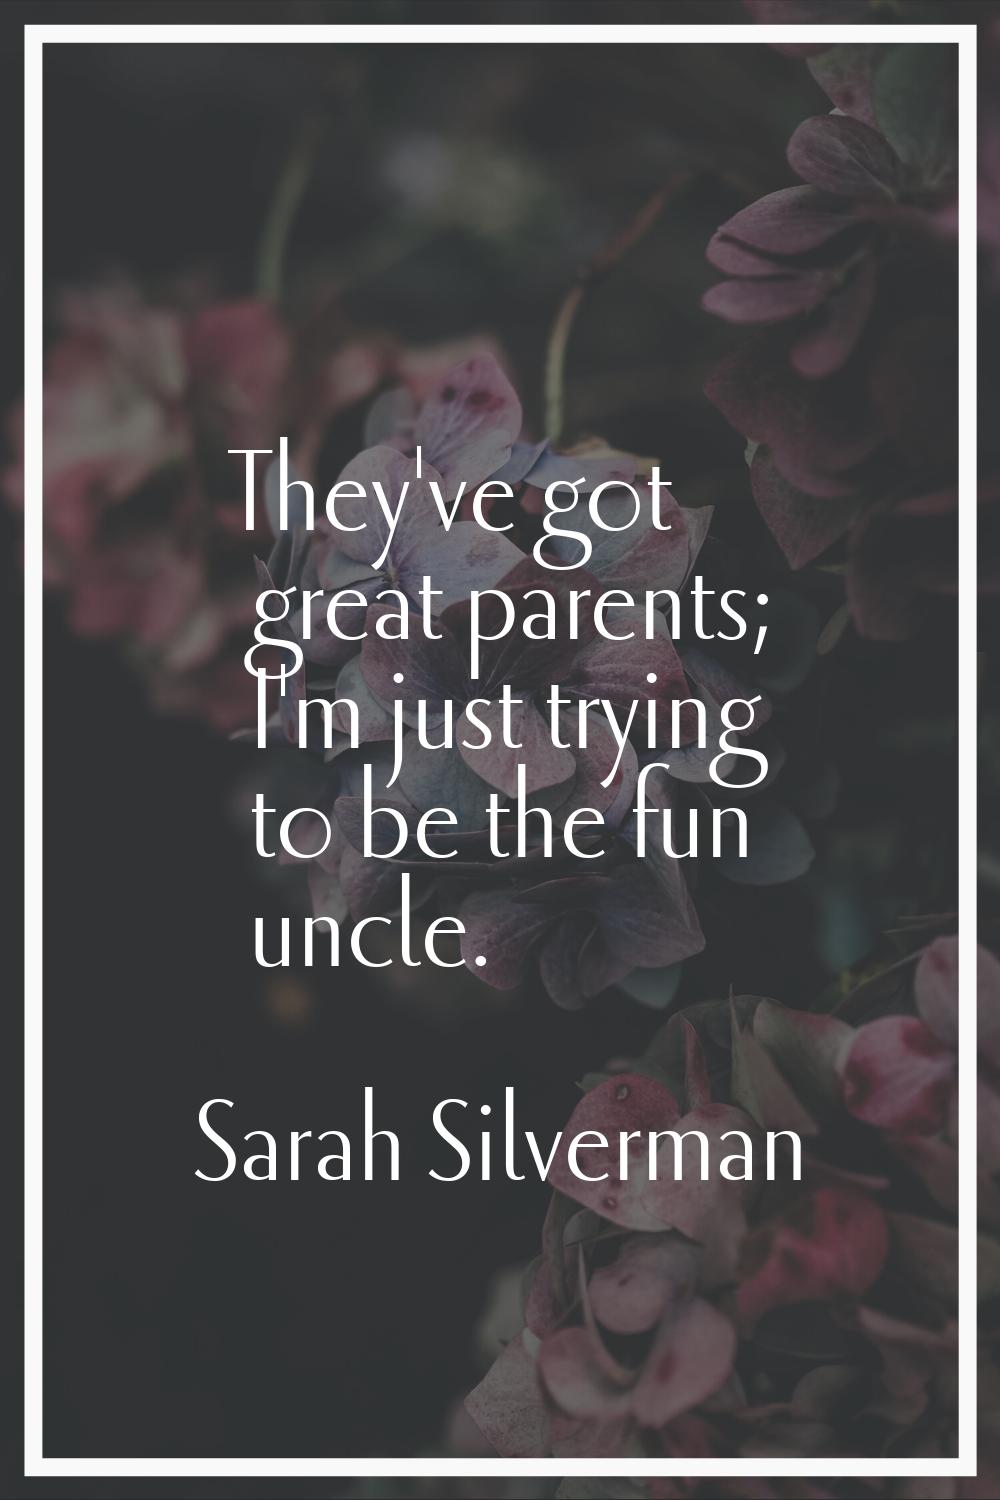 They've got great parents; I'm just trying to be the fun uncle.